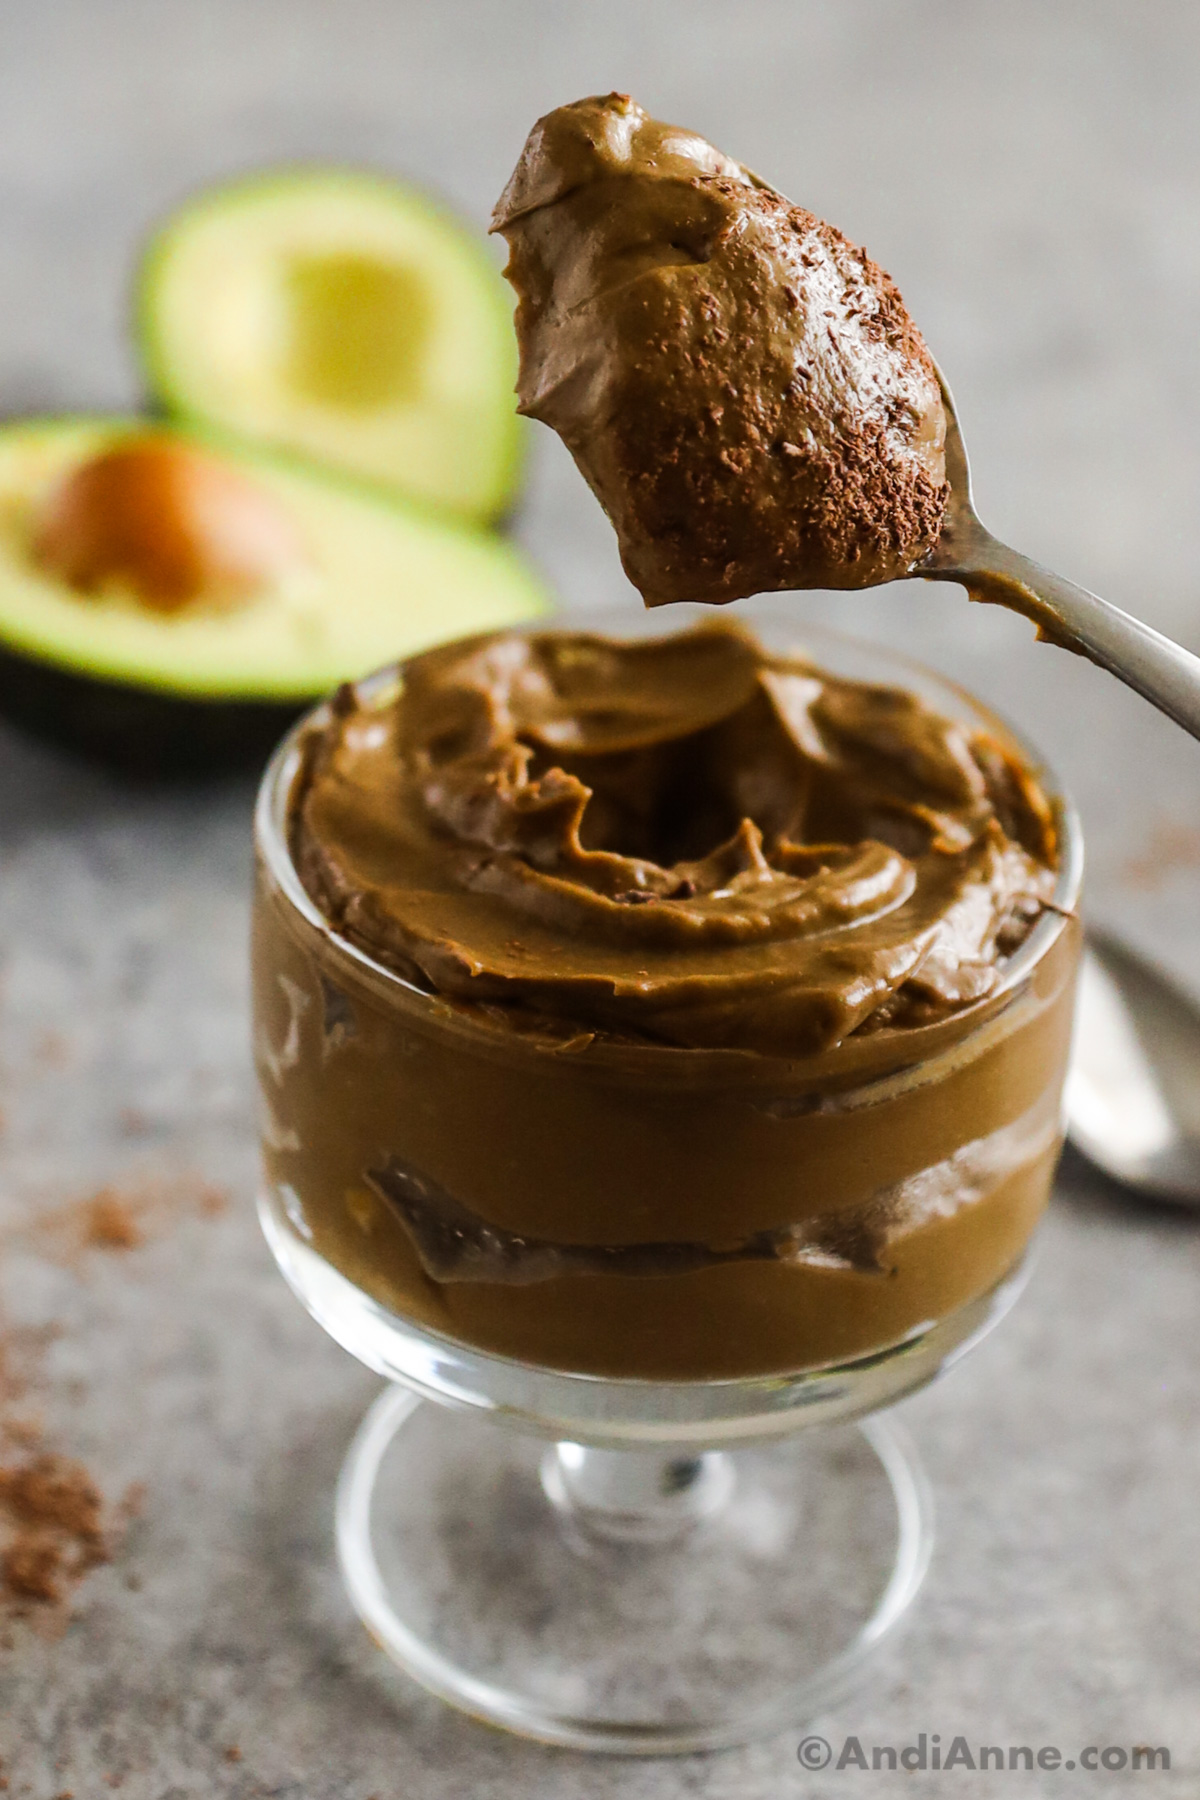 A spoon with chocolate pudding above the serving bowl with sliced avocados in the background.